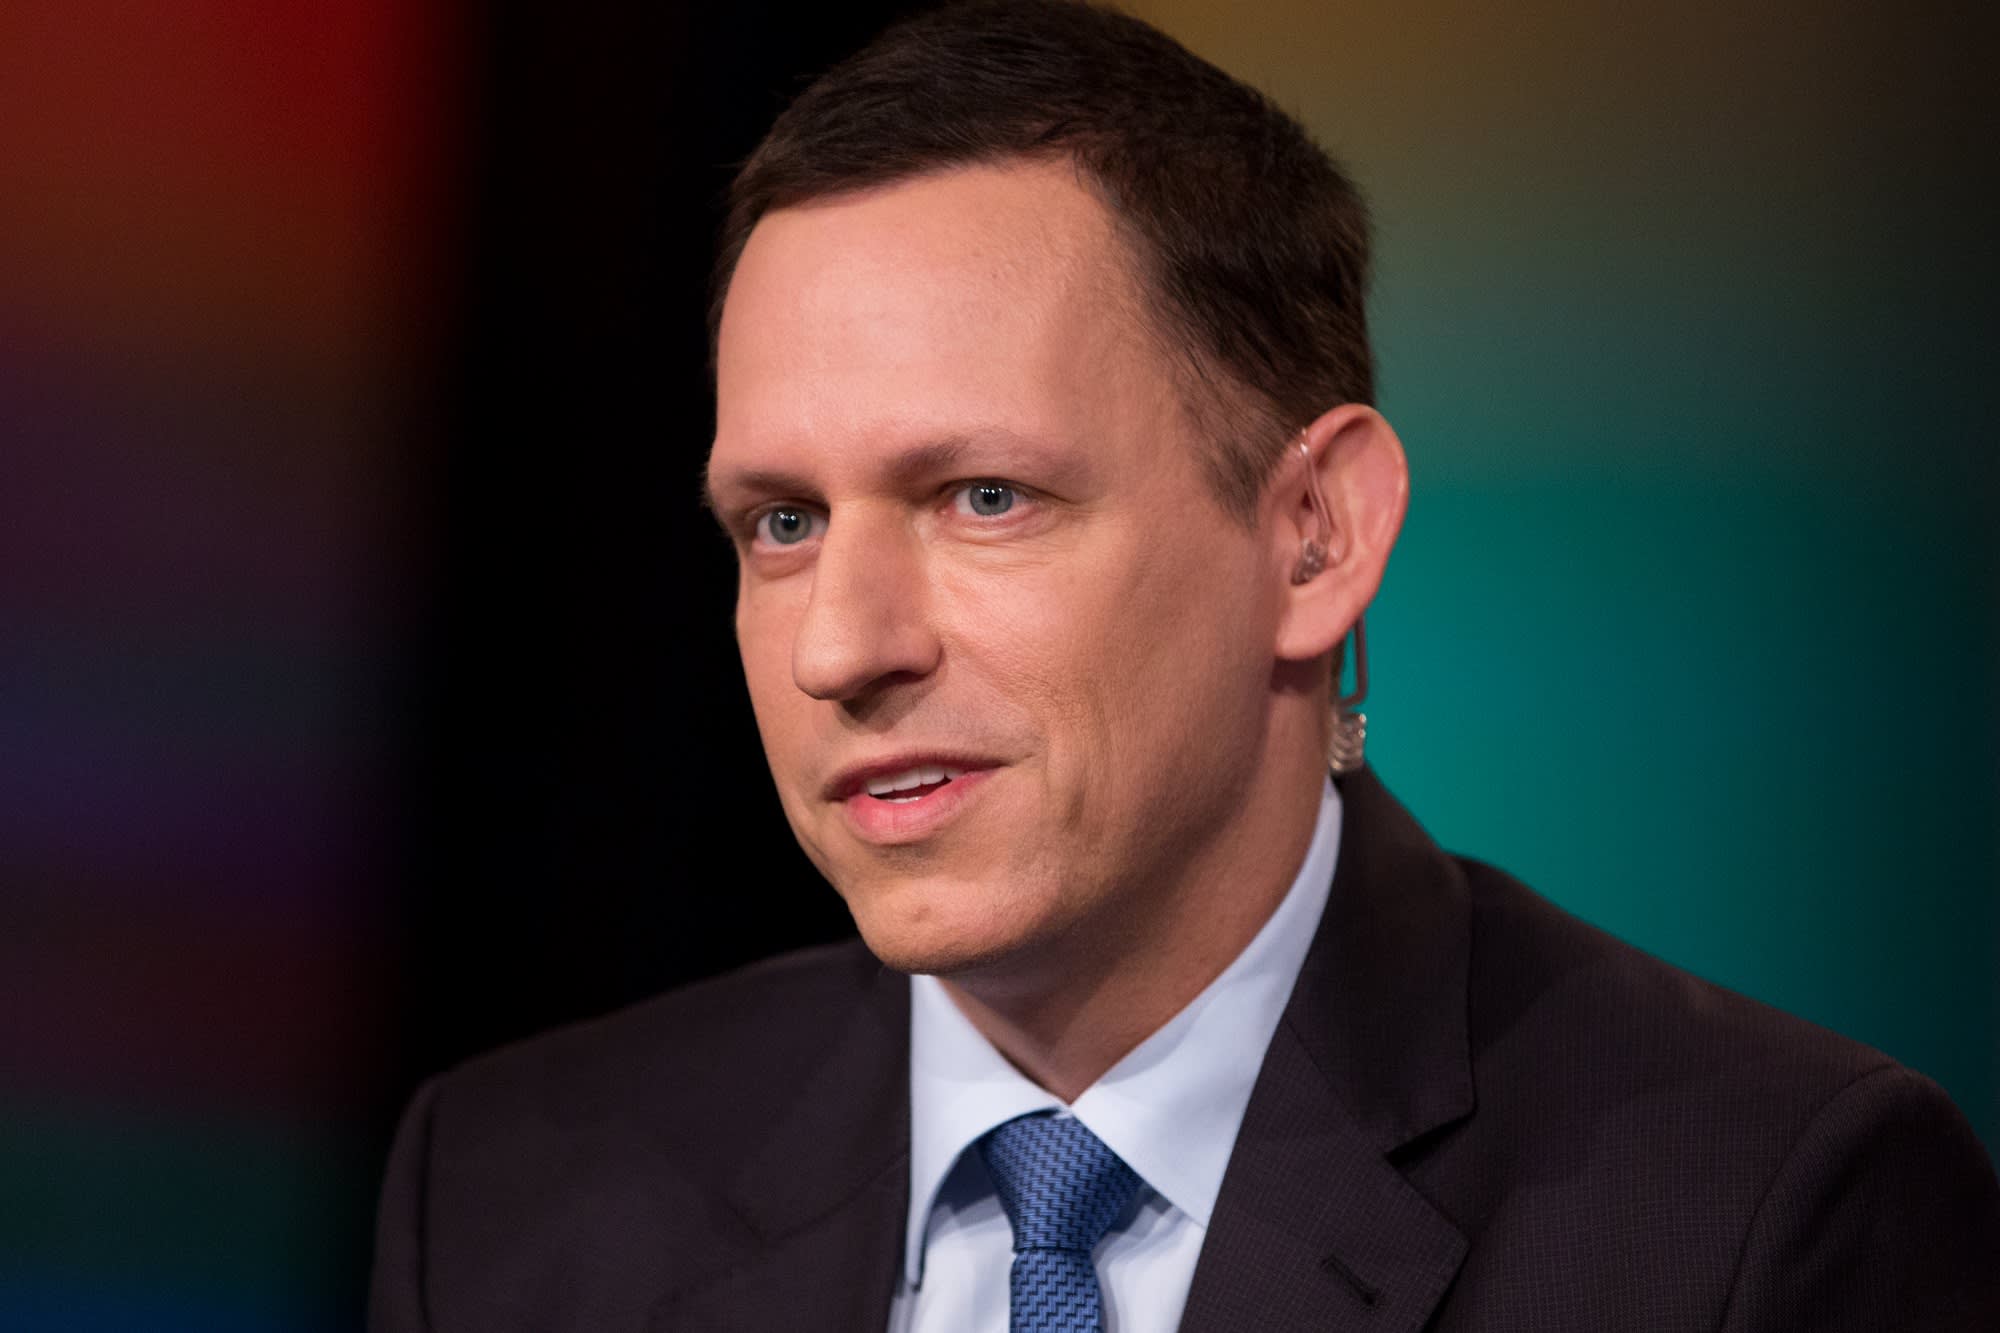 Early Facebook Investor Peter Thiel Steps Down From Meta’s Board of Directors